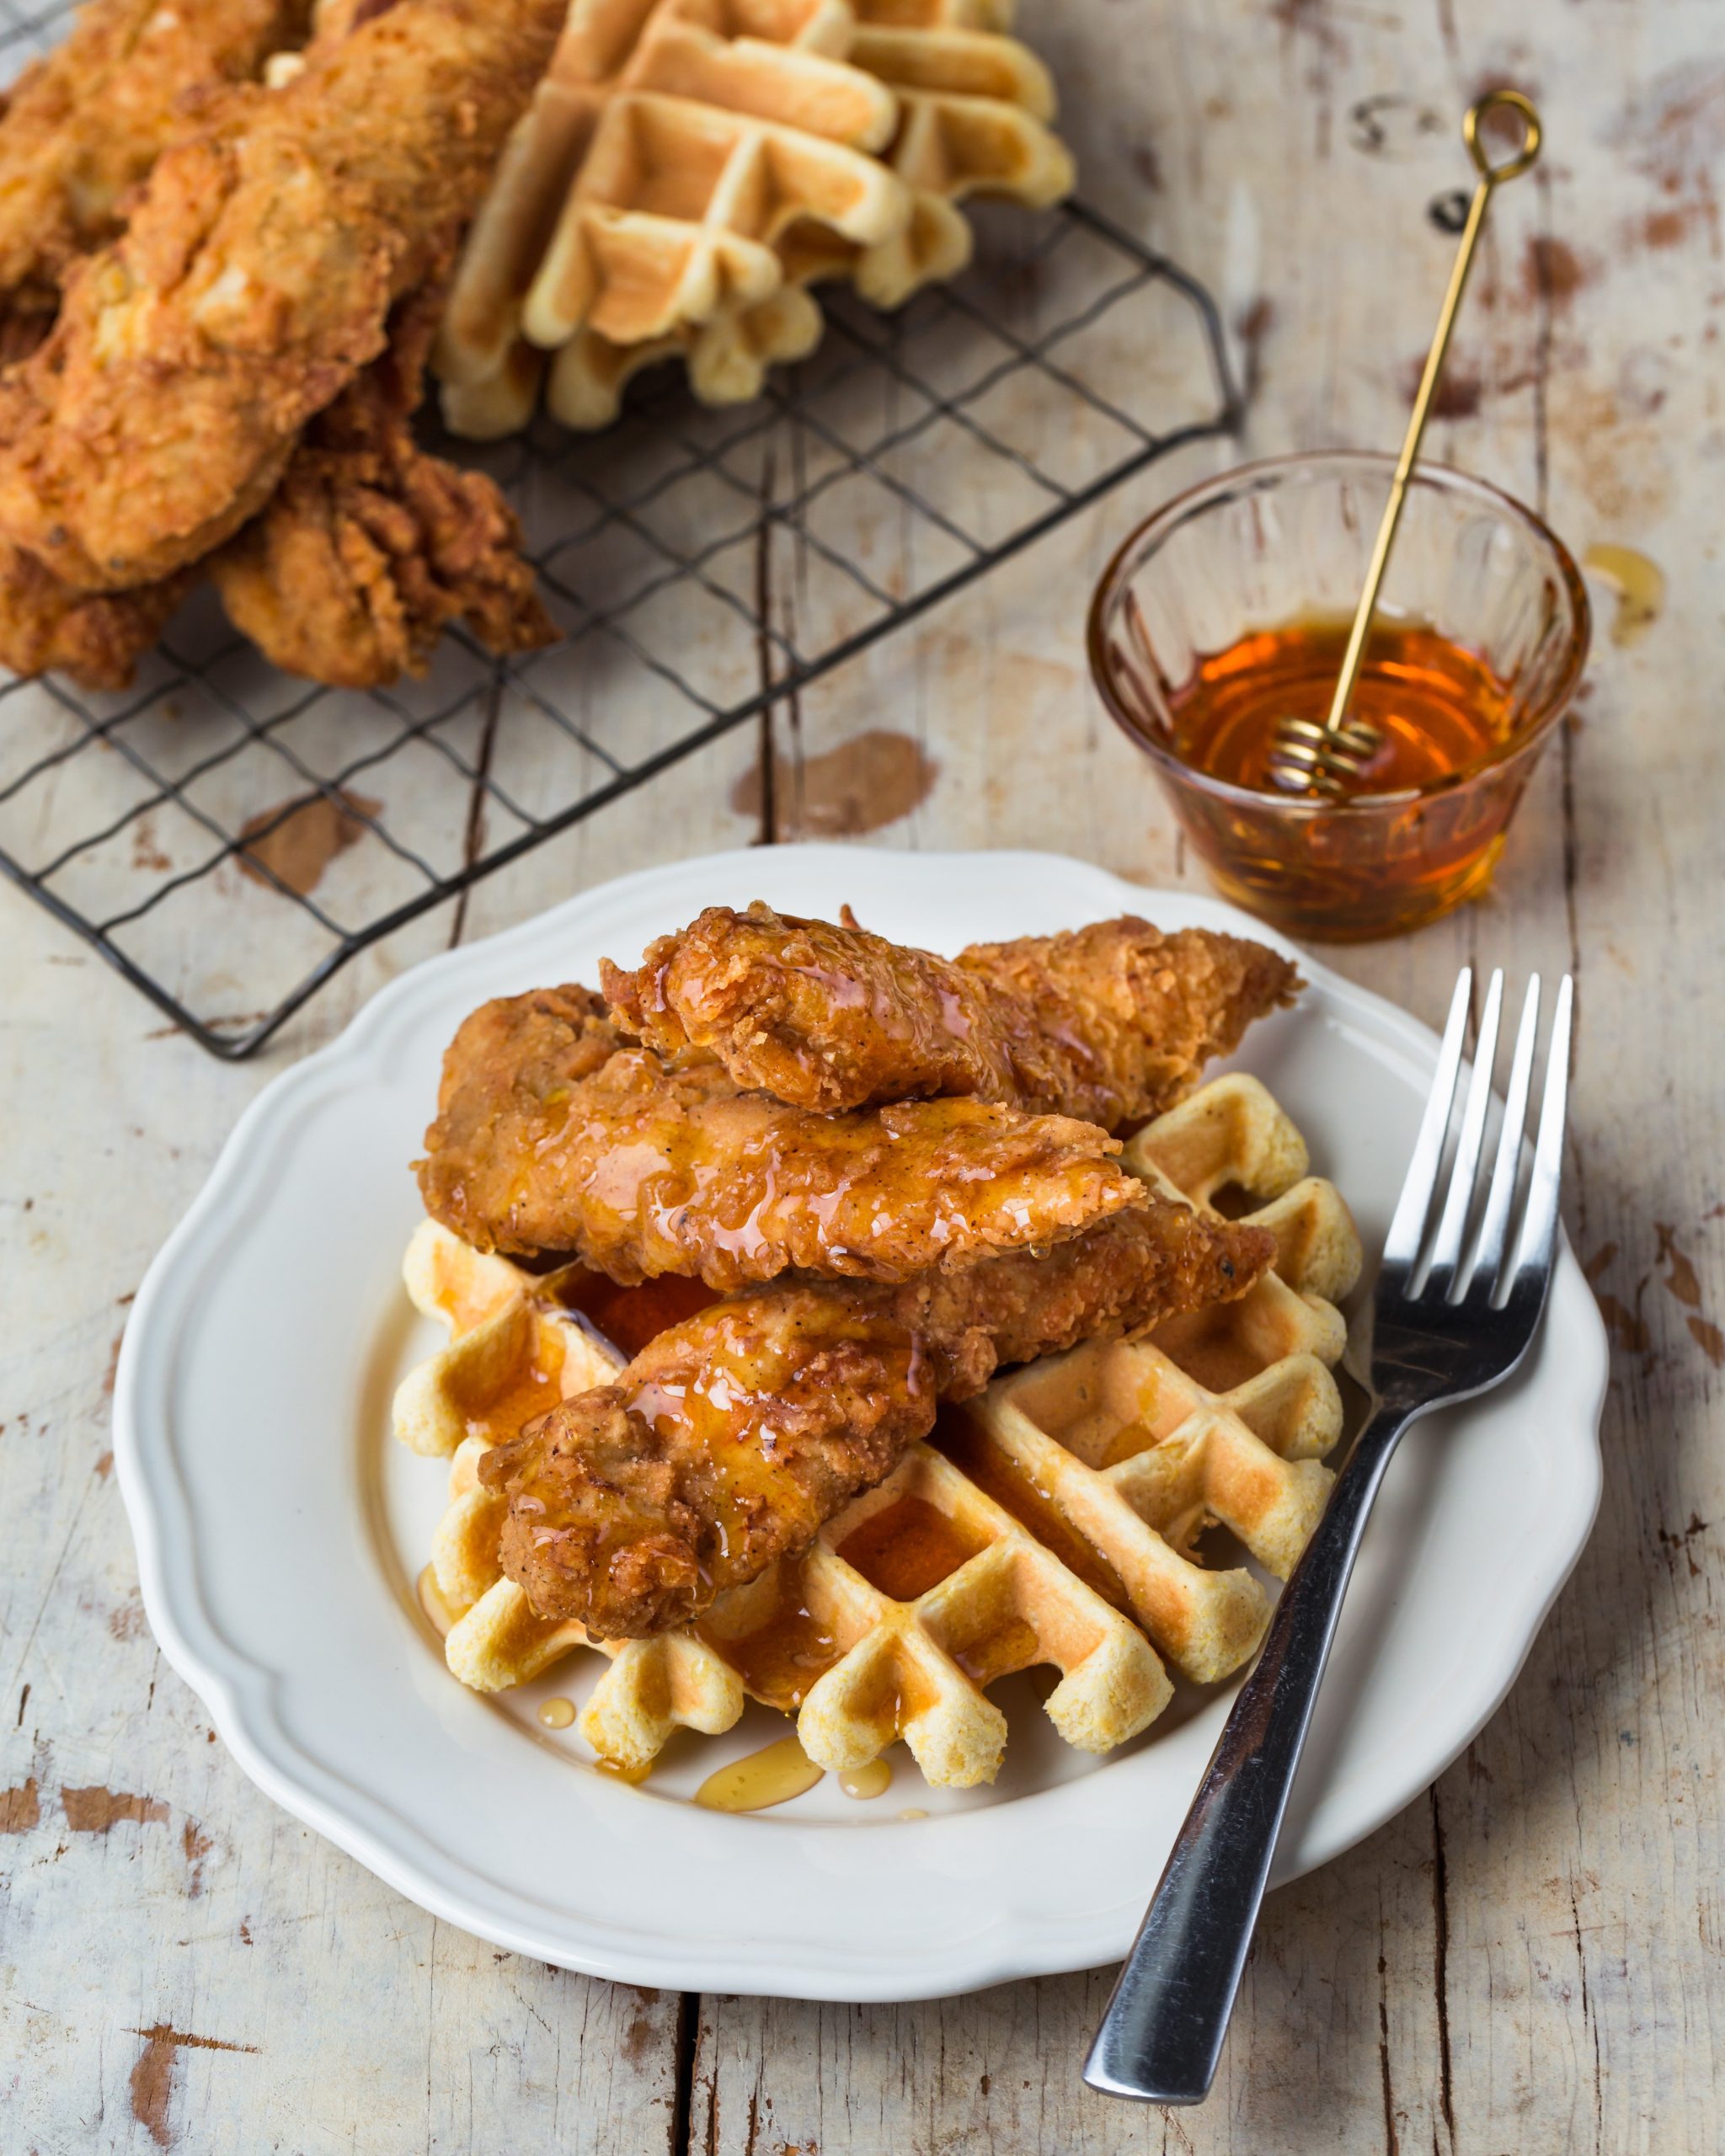 chicken and waffles at home